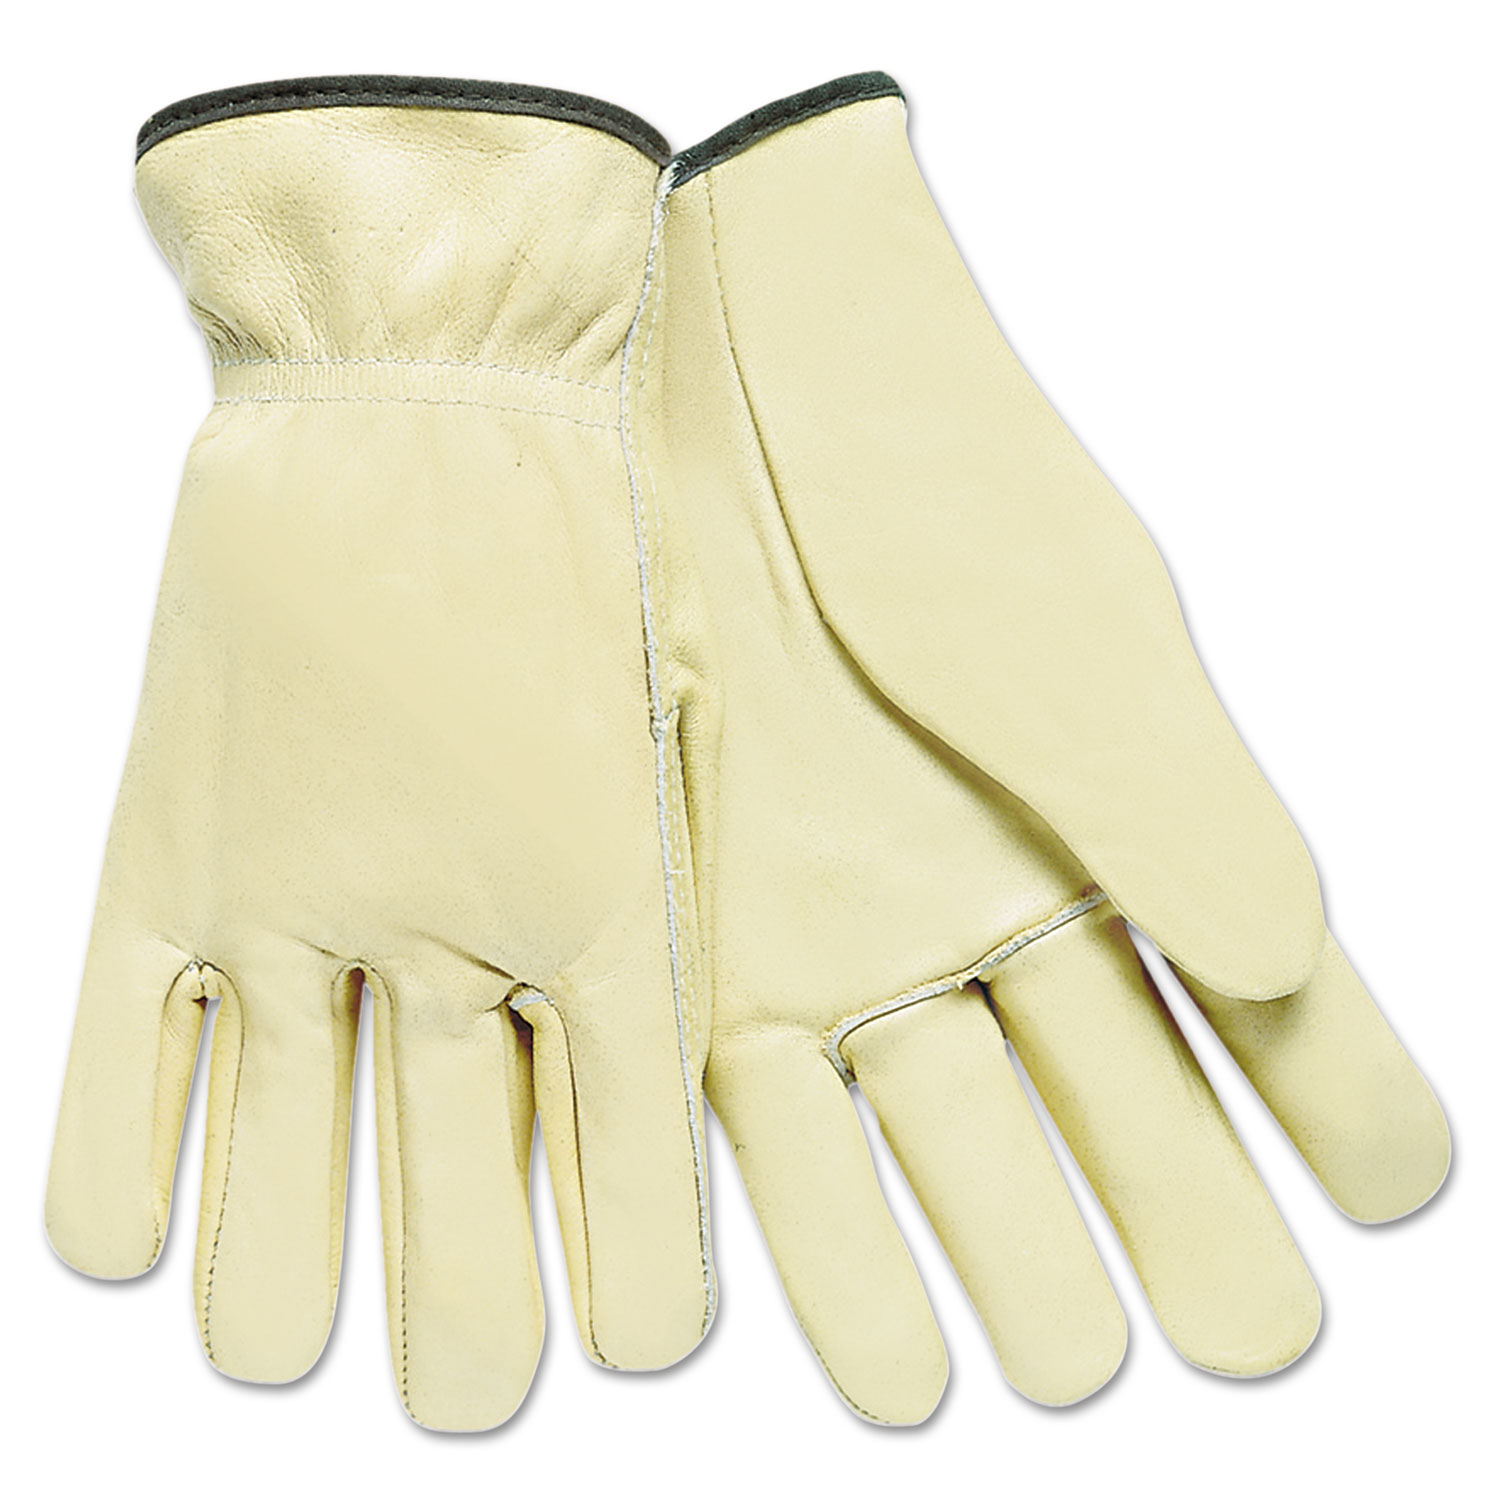  MCR Safety 3200L Full Leather Cow Grain Driver Gloves, Tan, Large, 12 Pairs (MPG3200L) 